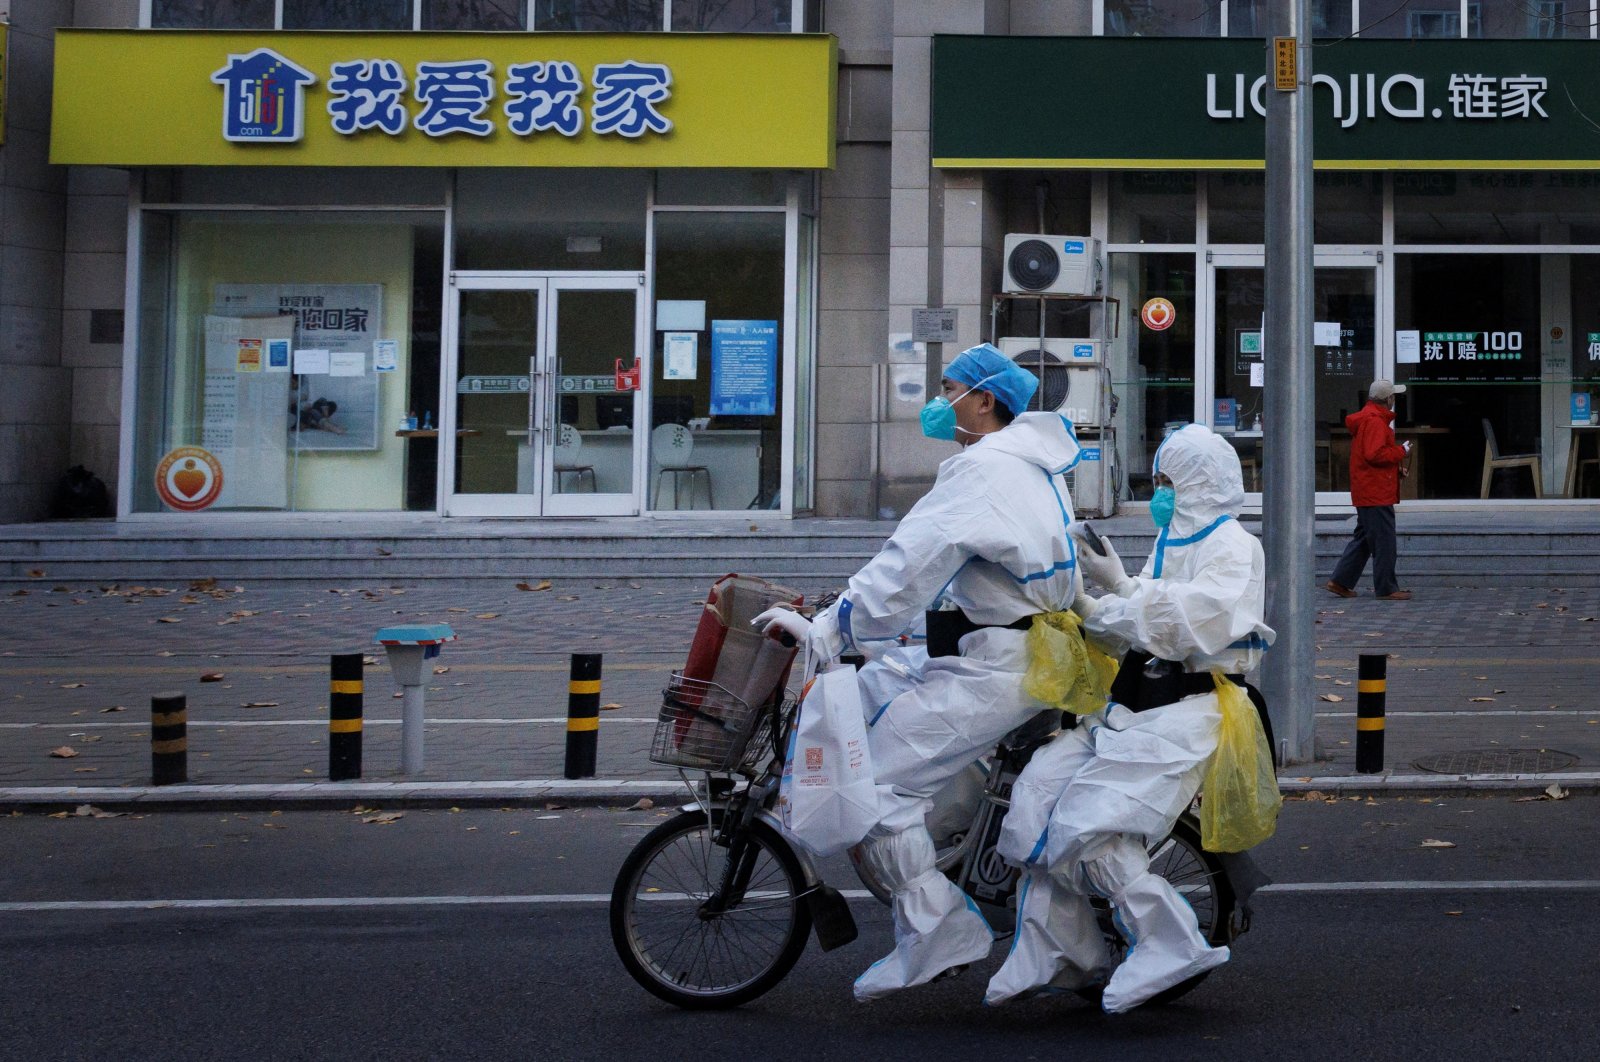 Pandemic prevention workers in protective suits ride an electric bike in Beijing, China, Nov. 21, 2022. (Reuters Photo)